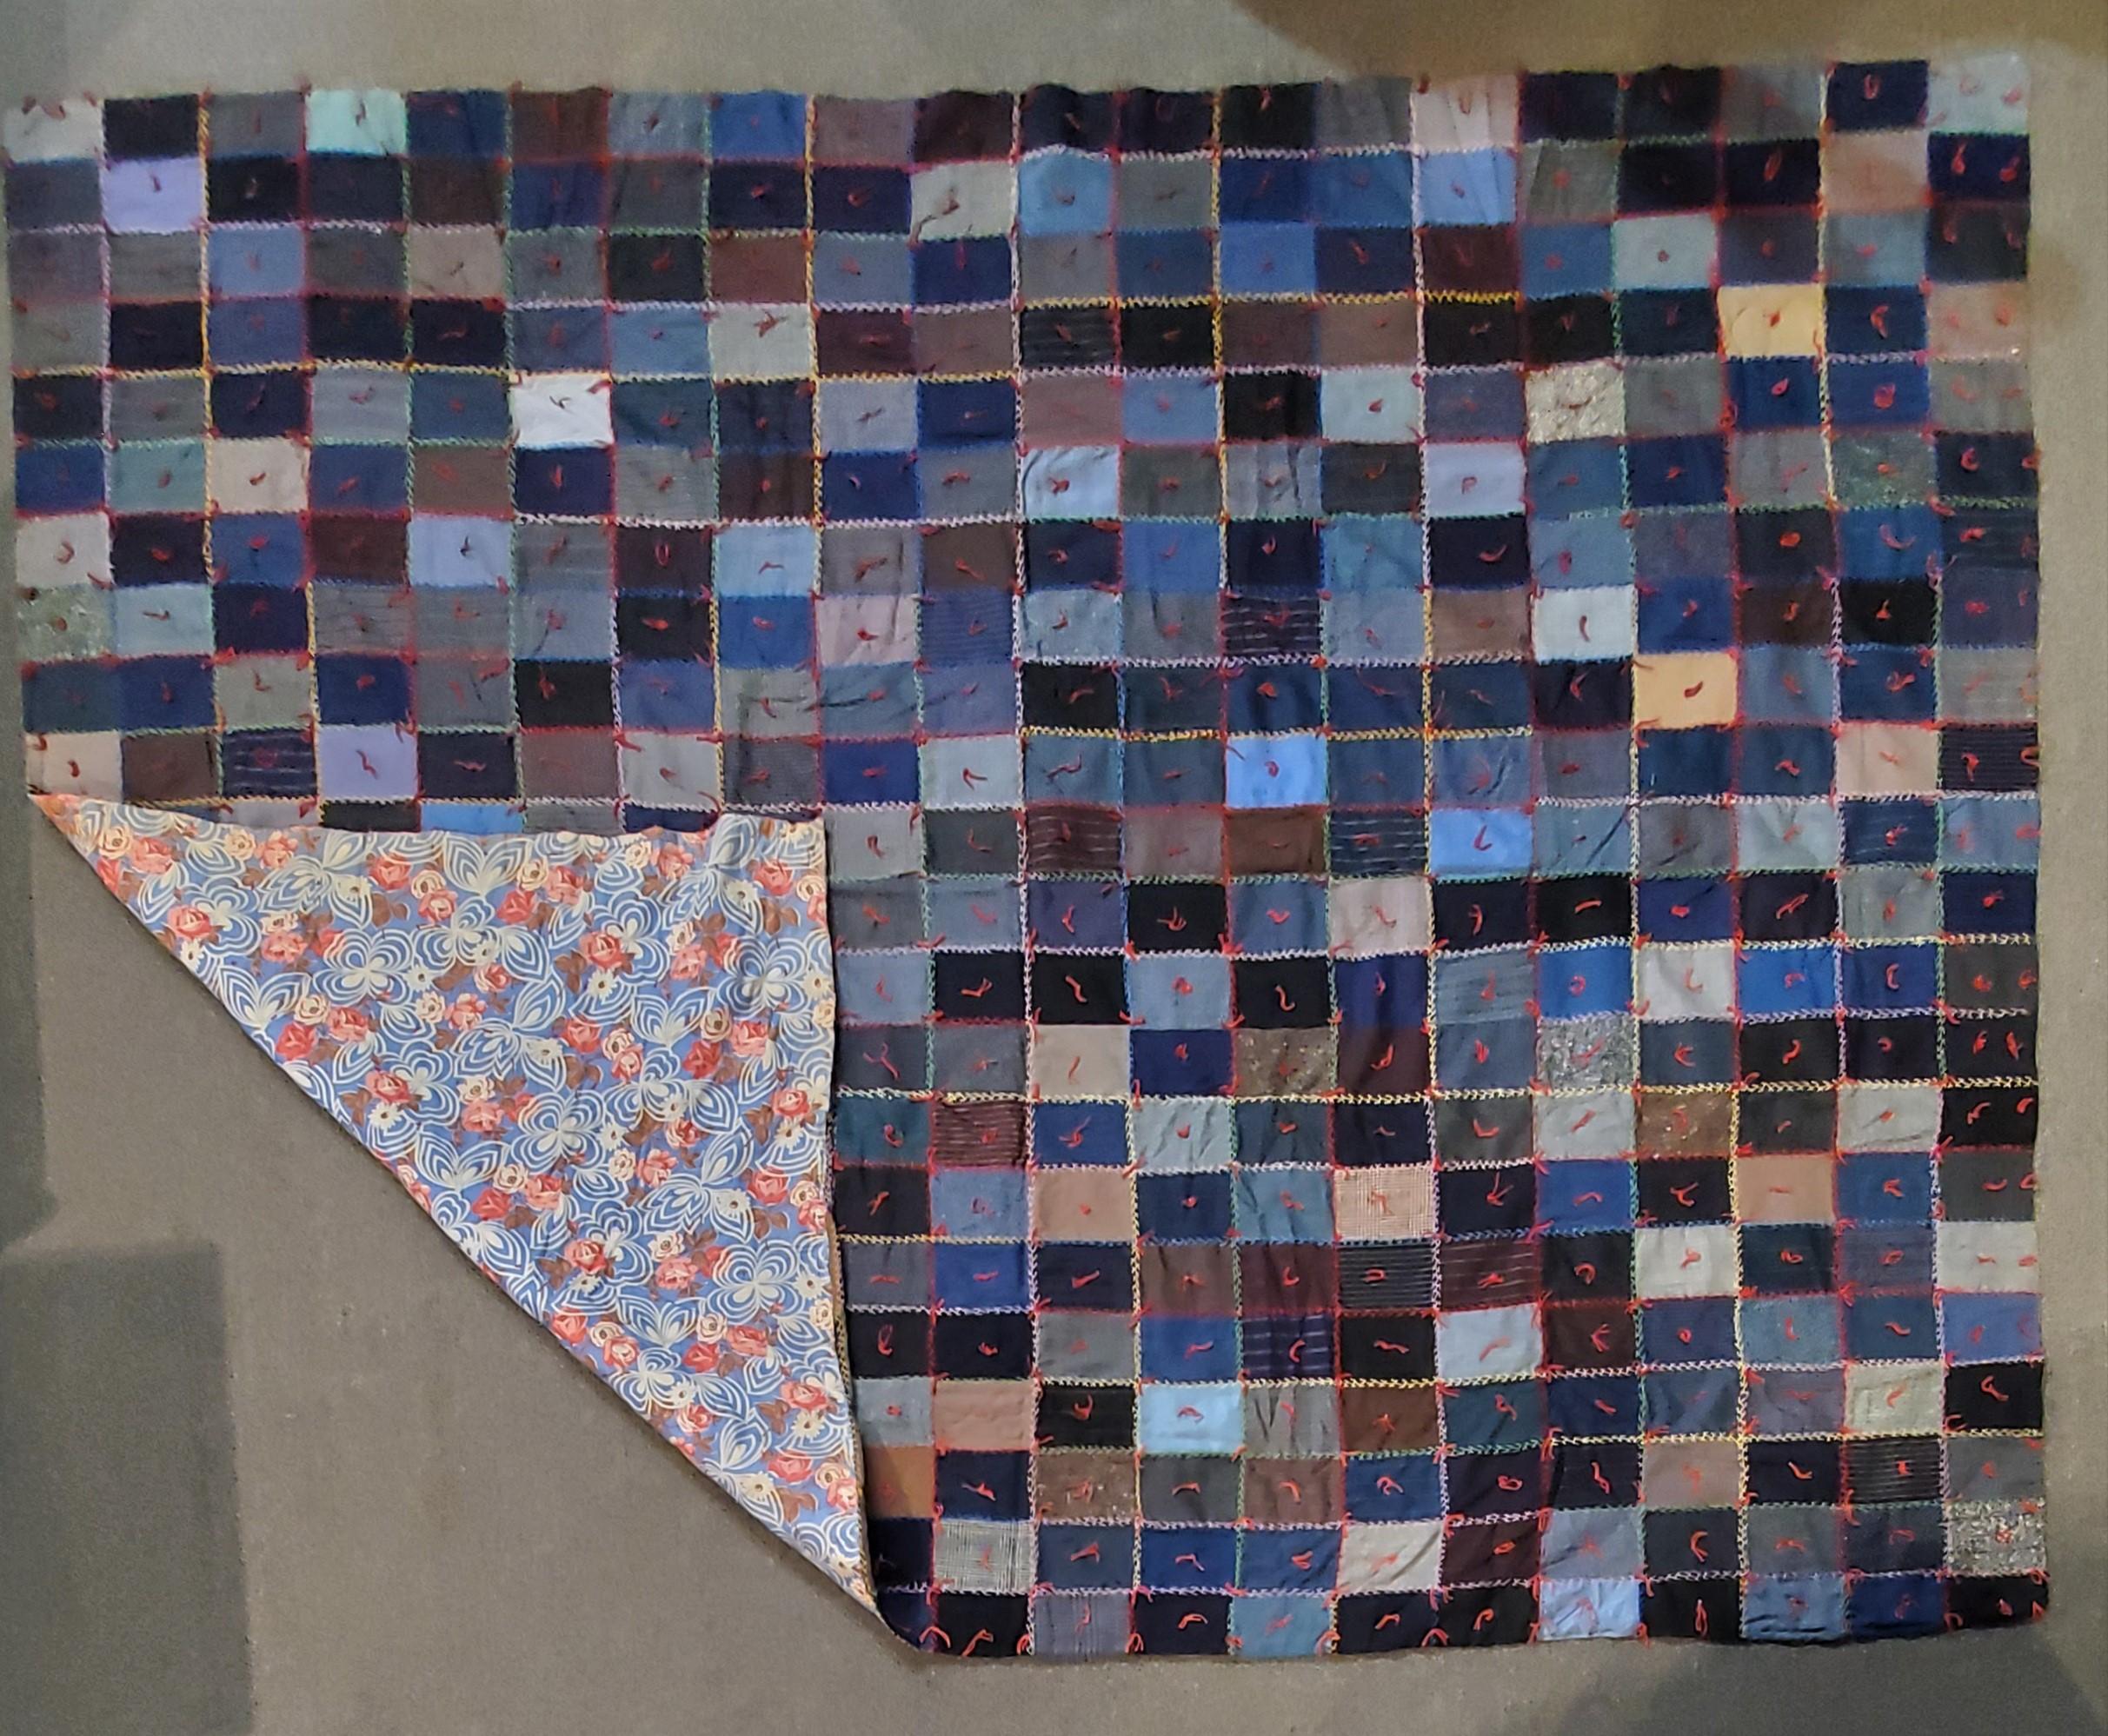 19th century wool one patch old suiting quilt in good condition. This was found in Lancaster, Pennsylvania.